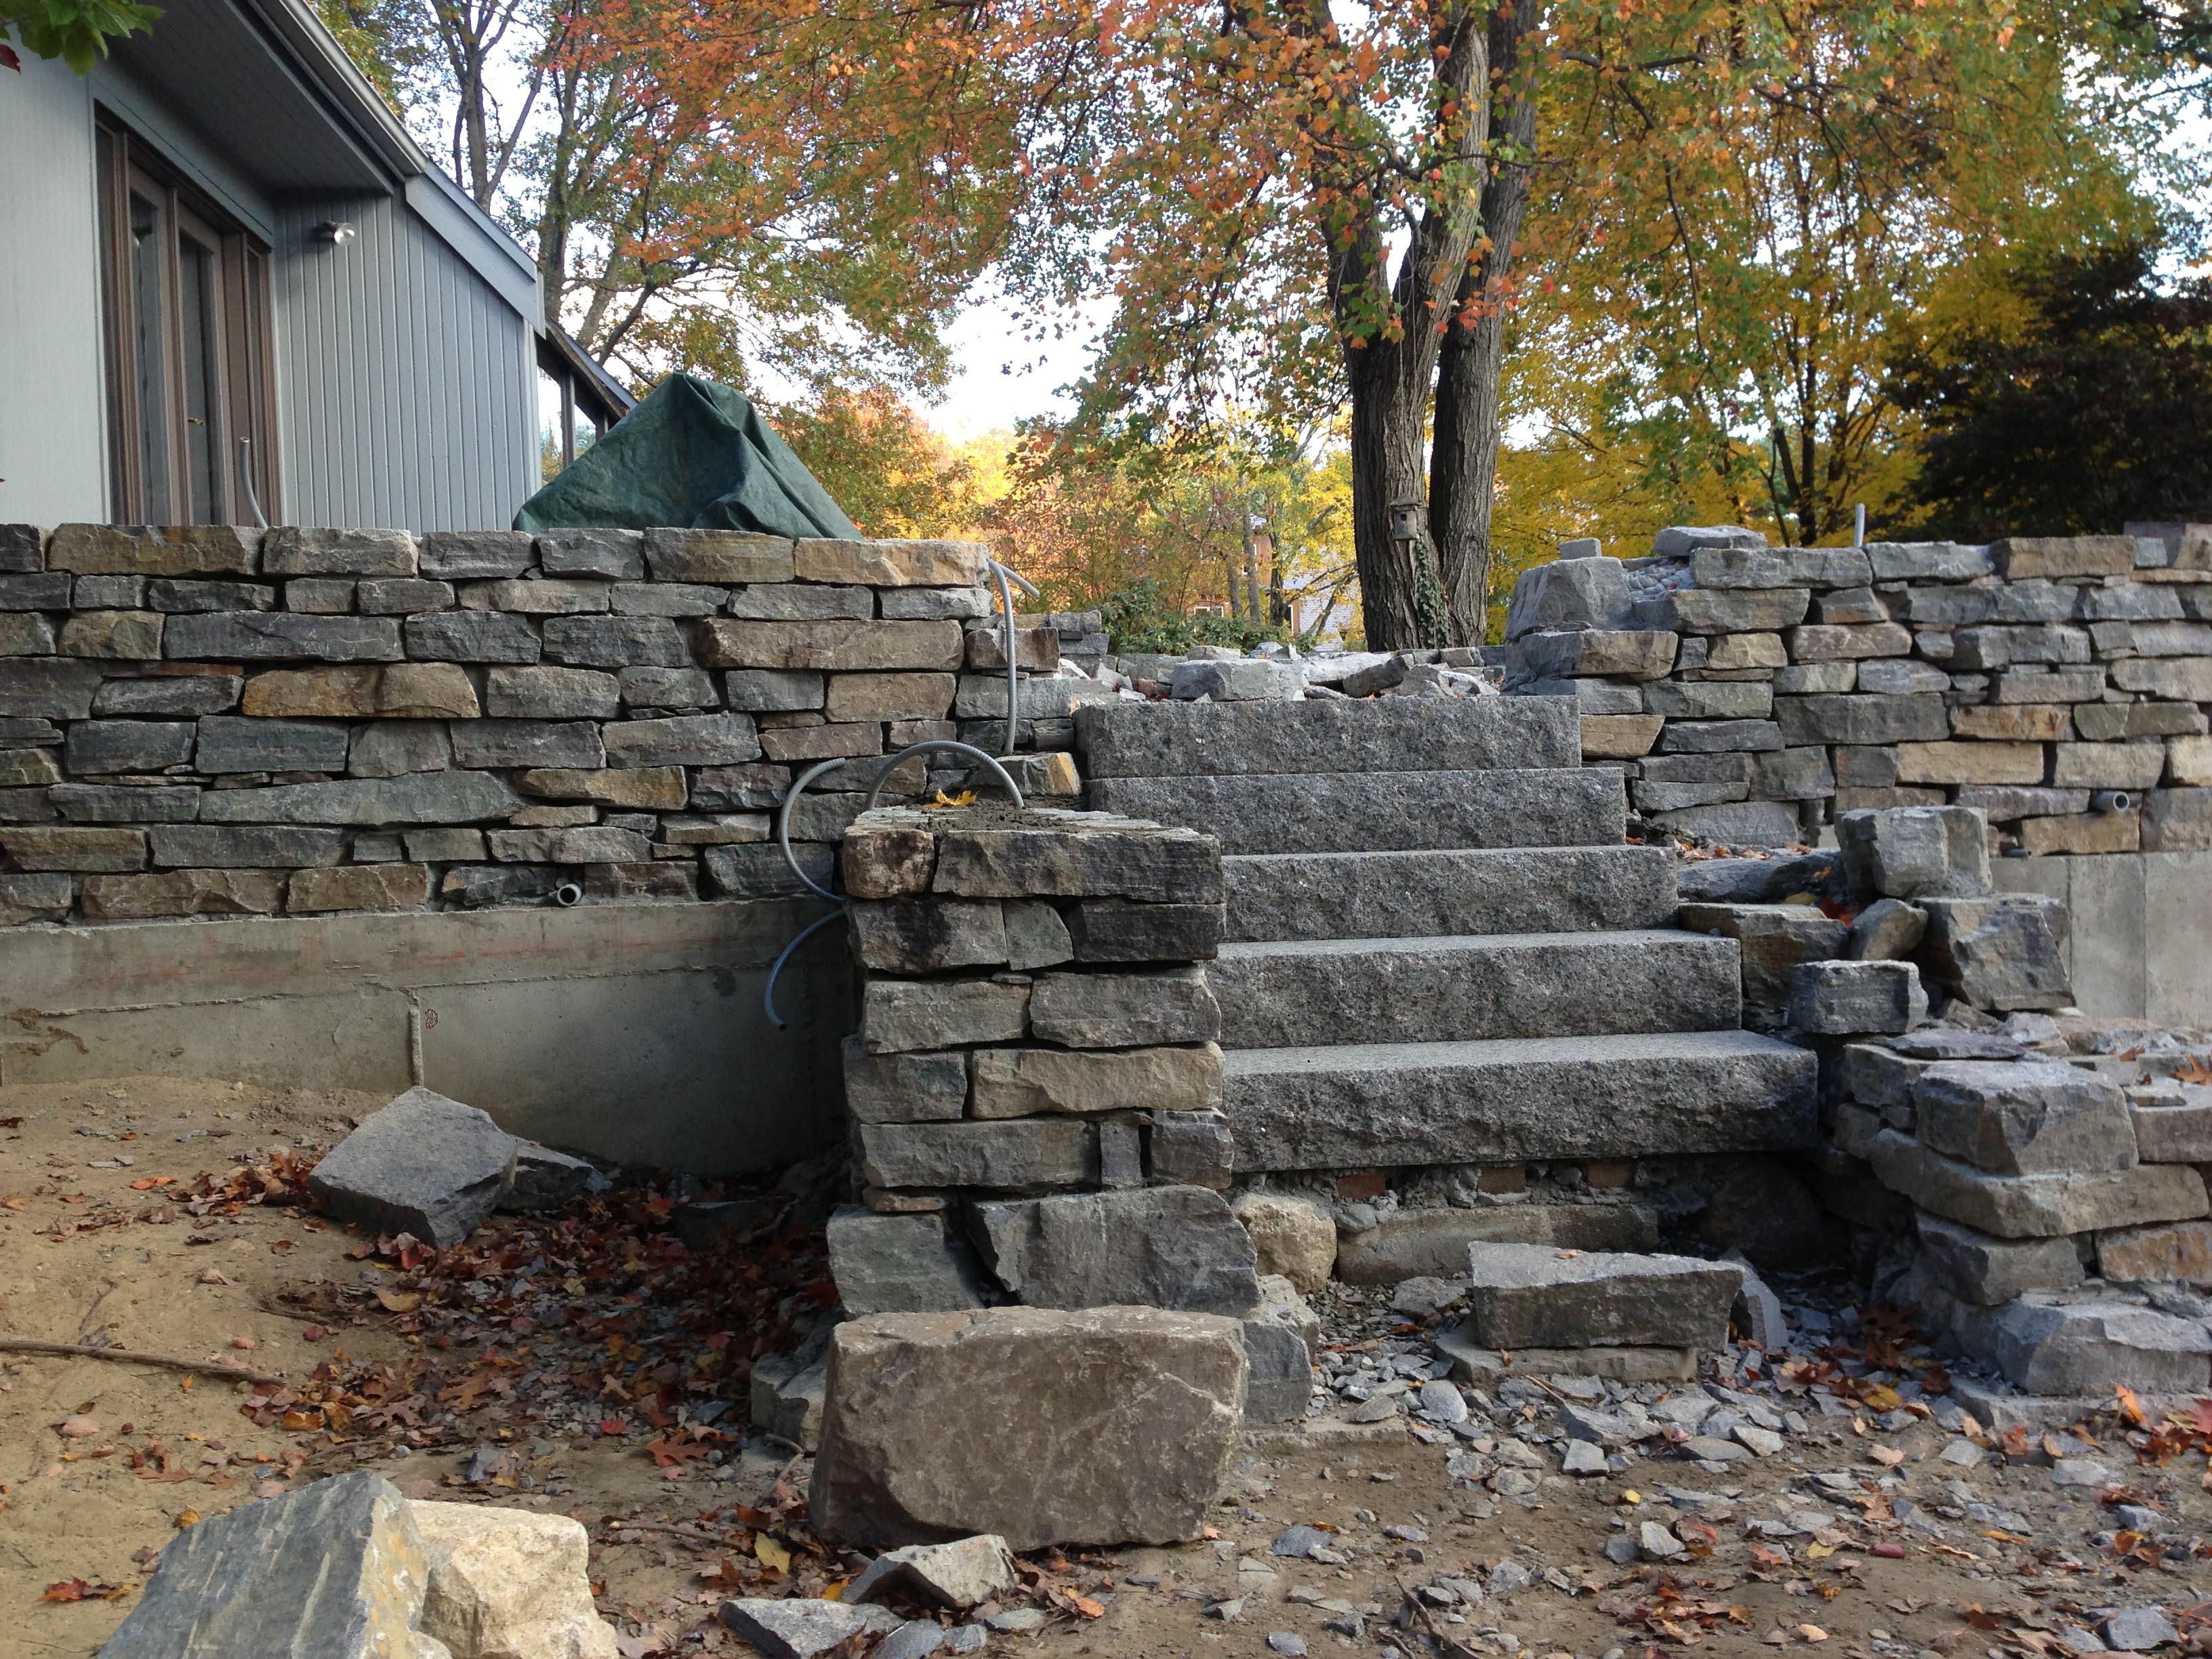 Artistic-Landscapes.com Blog » Natural Stone Wall and Patio in ...